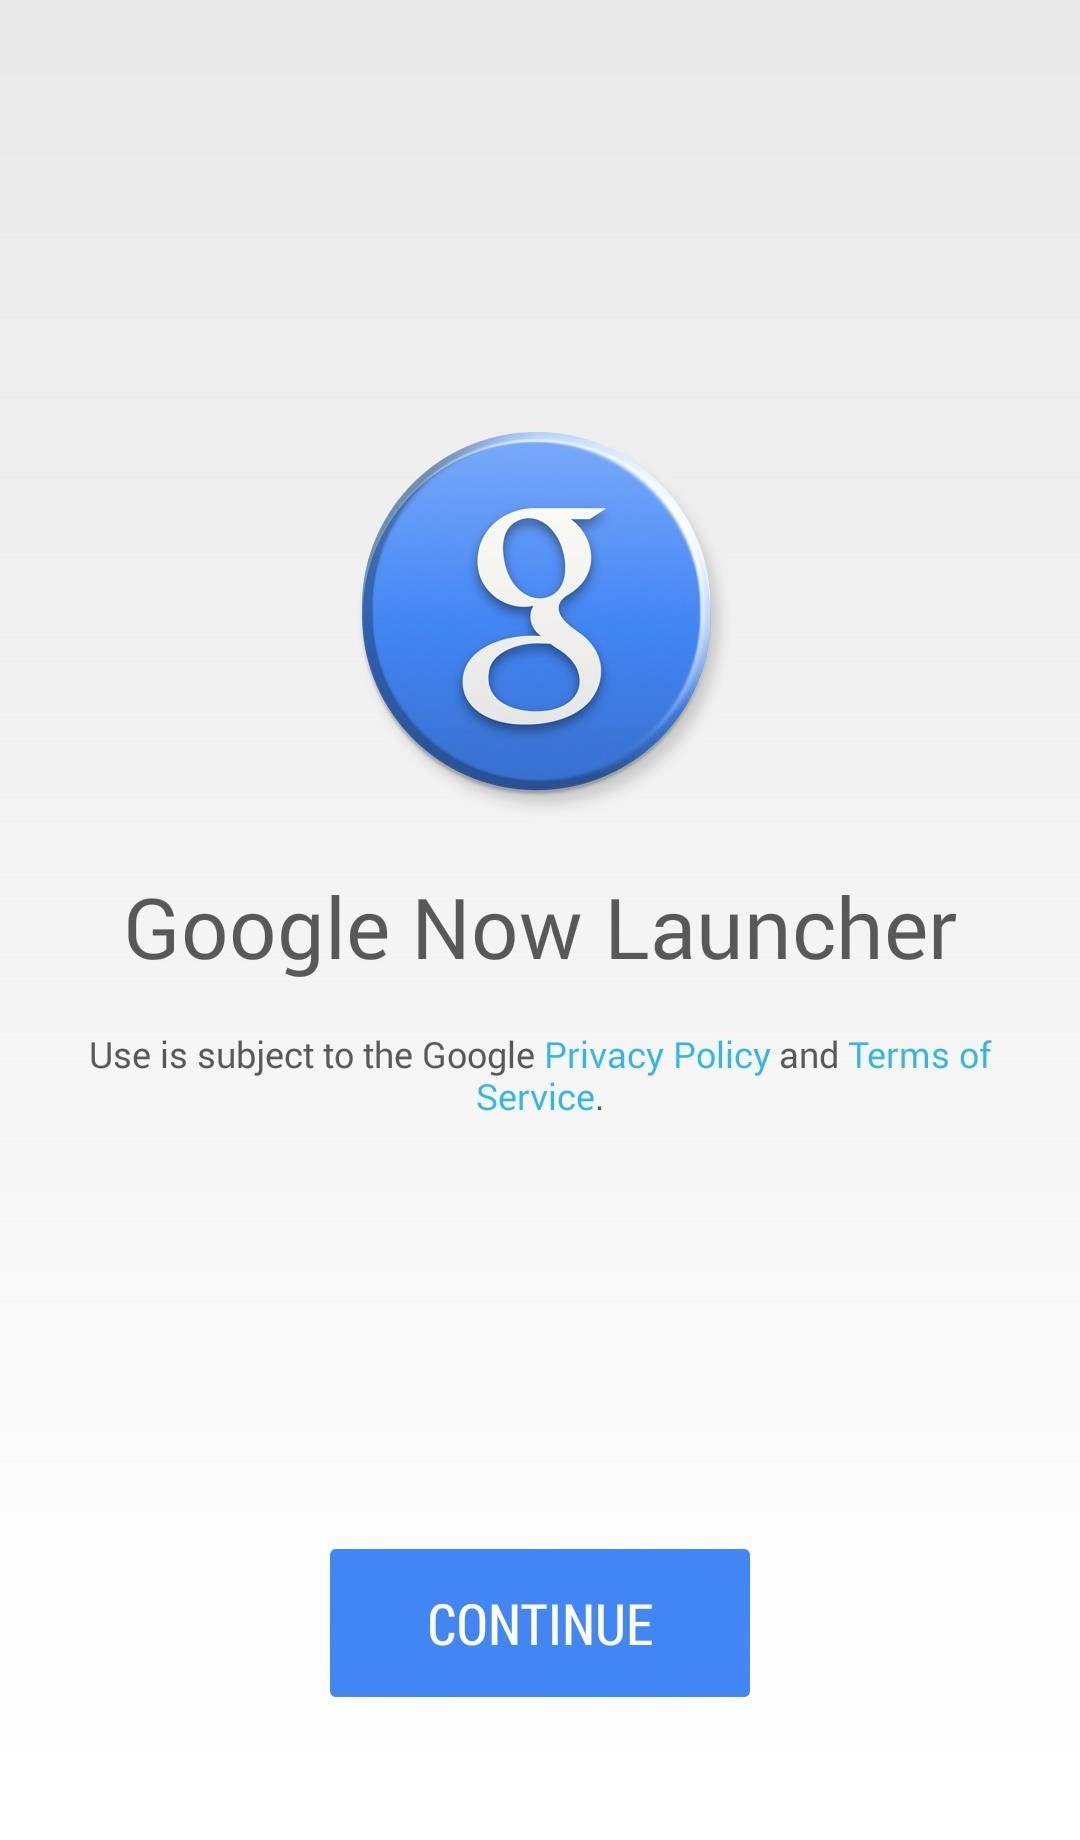 New Google Now Launcher Makes Your Old Android Feel Like It’s Running Lollipop